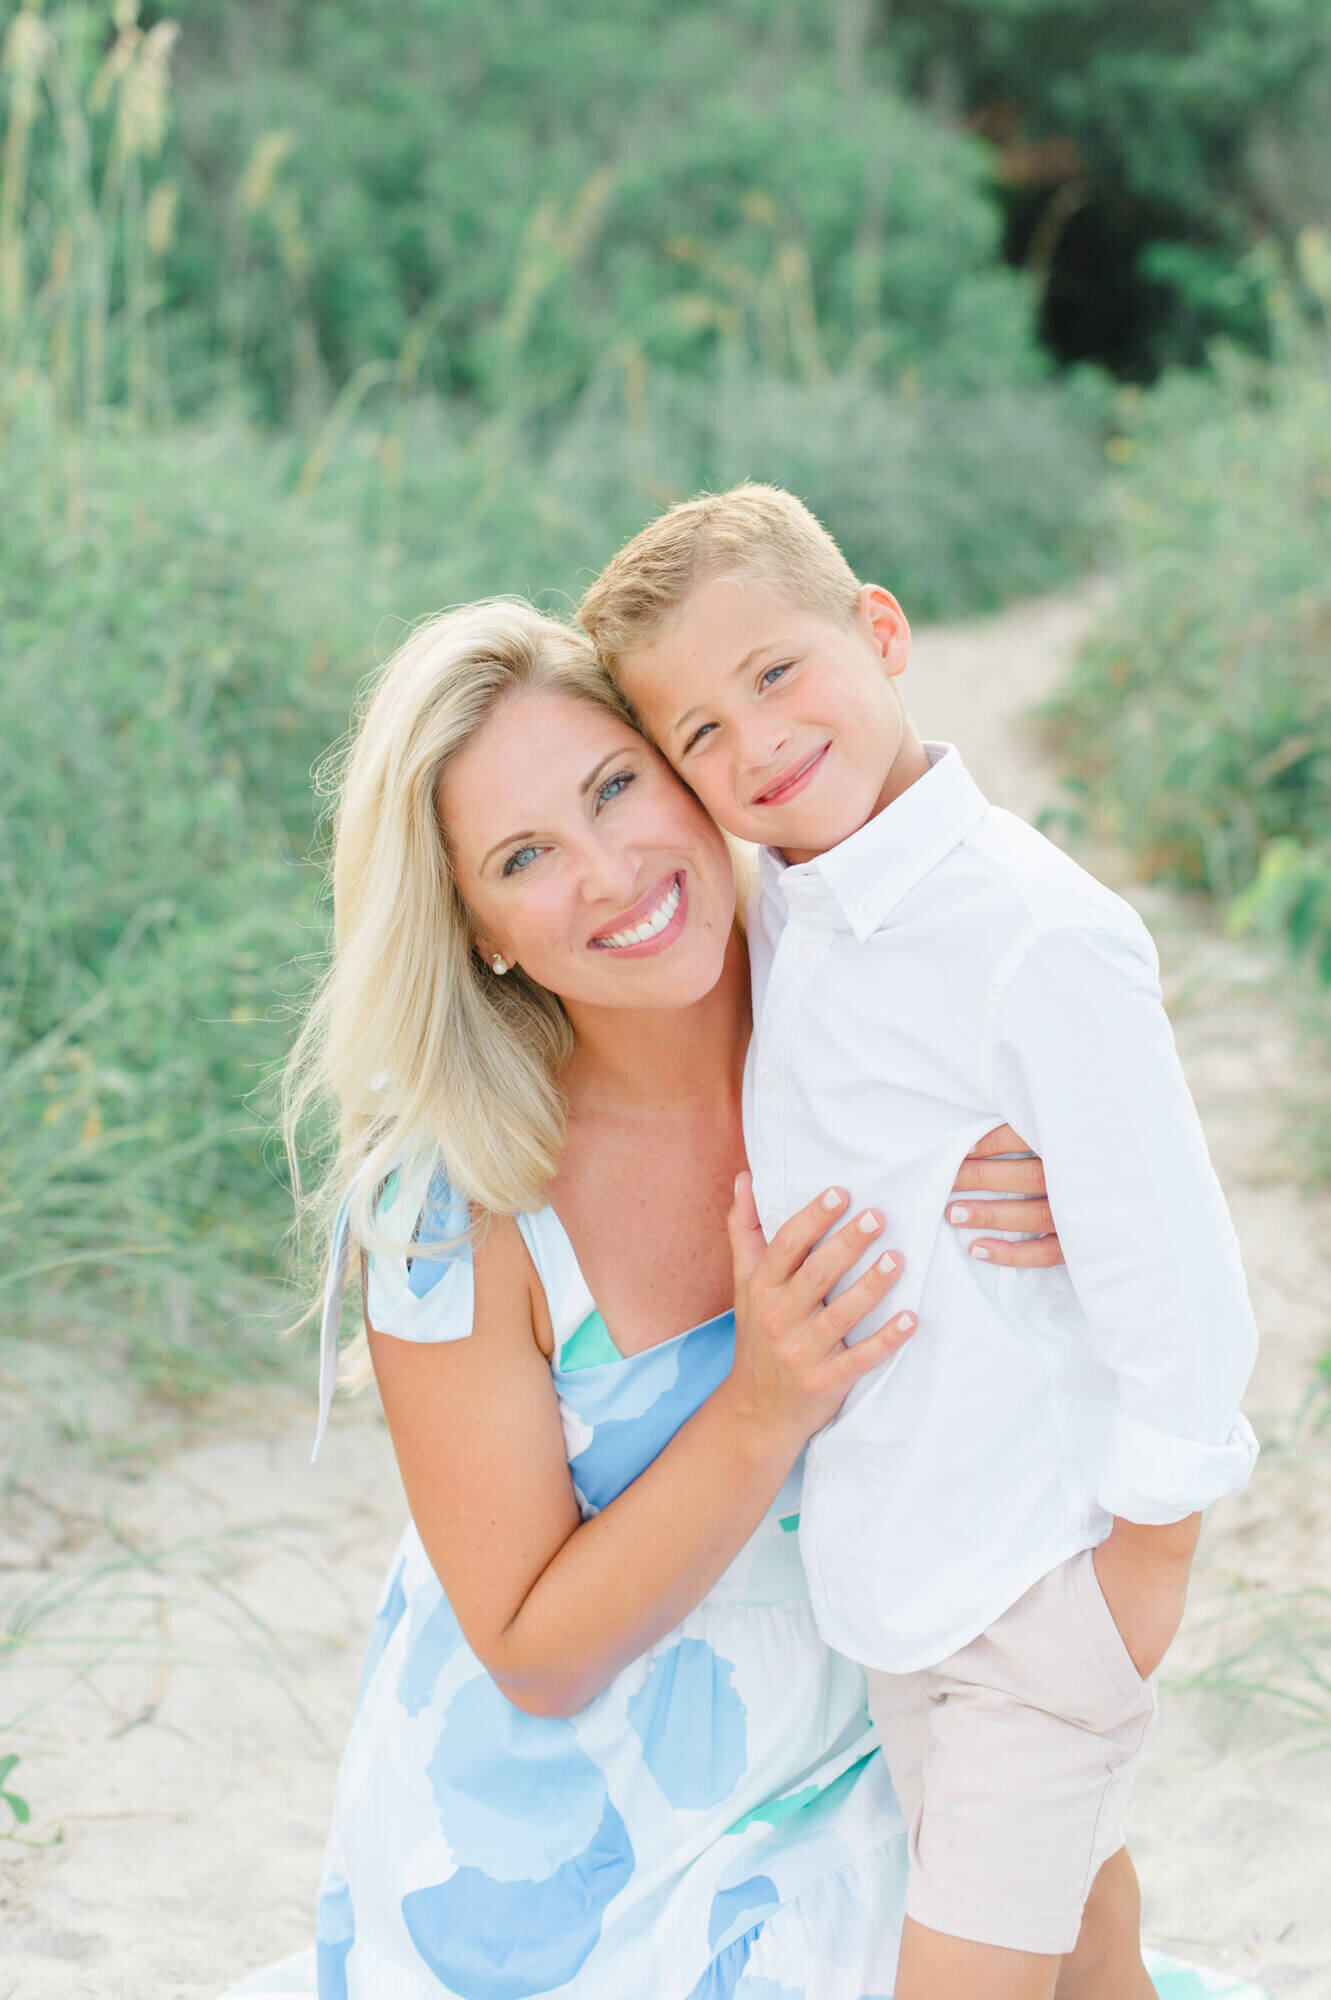 Mom holding her son near the beach dunes and greenery while smiling at the camera during their family beach photoshoot